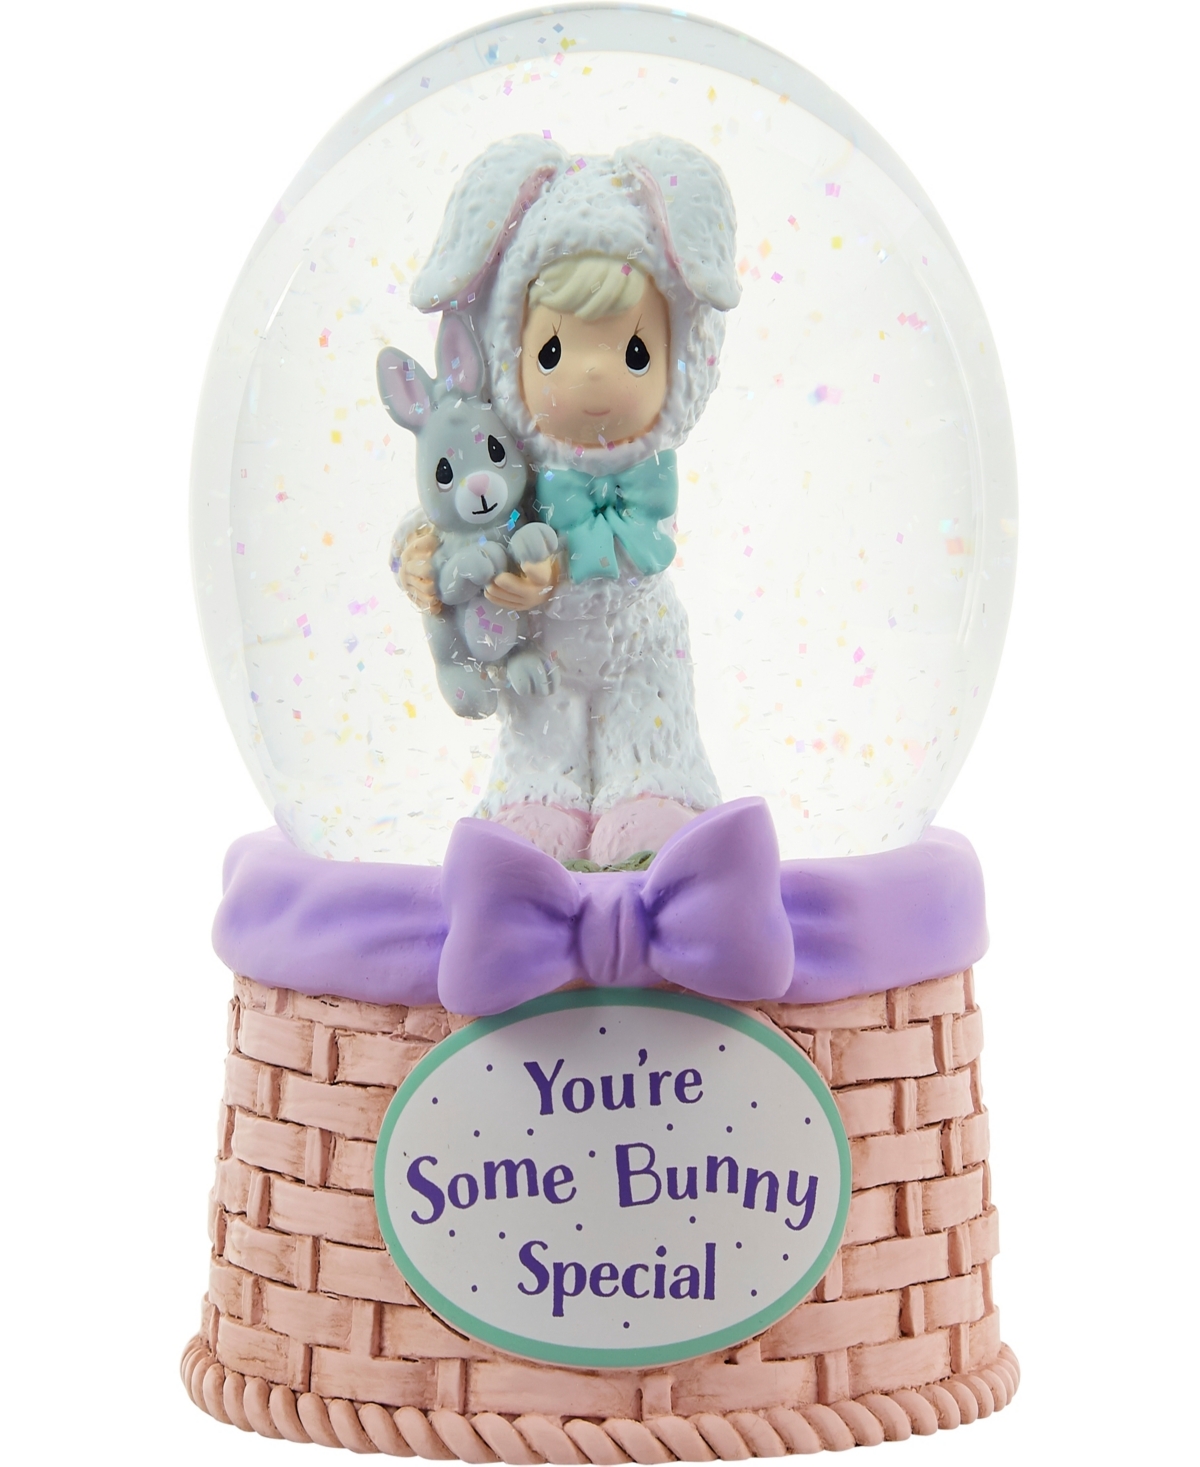 222101 You're Some Special Resin and Glass Musical Snow Globe - Multicolored